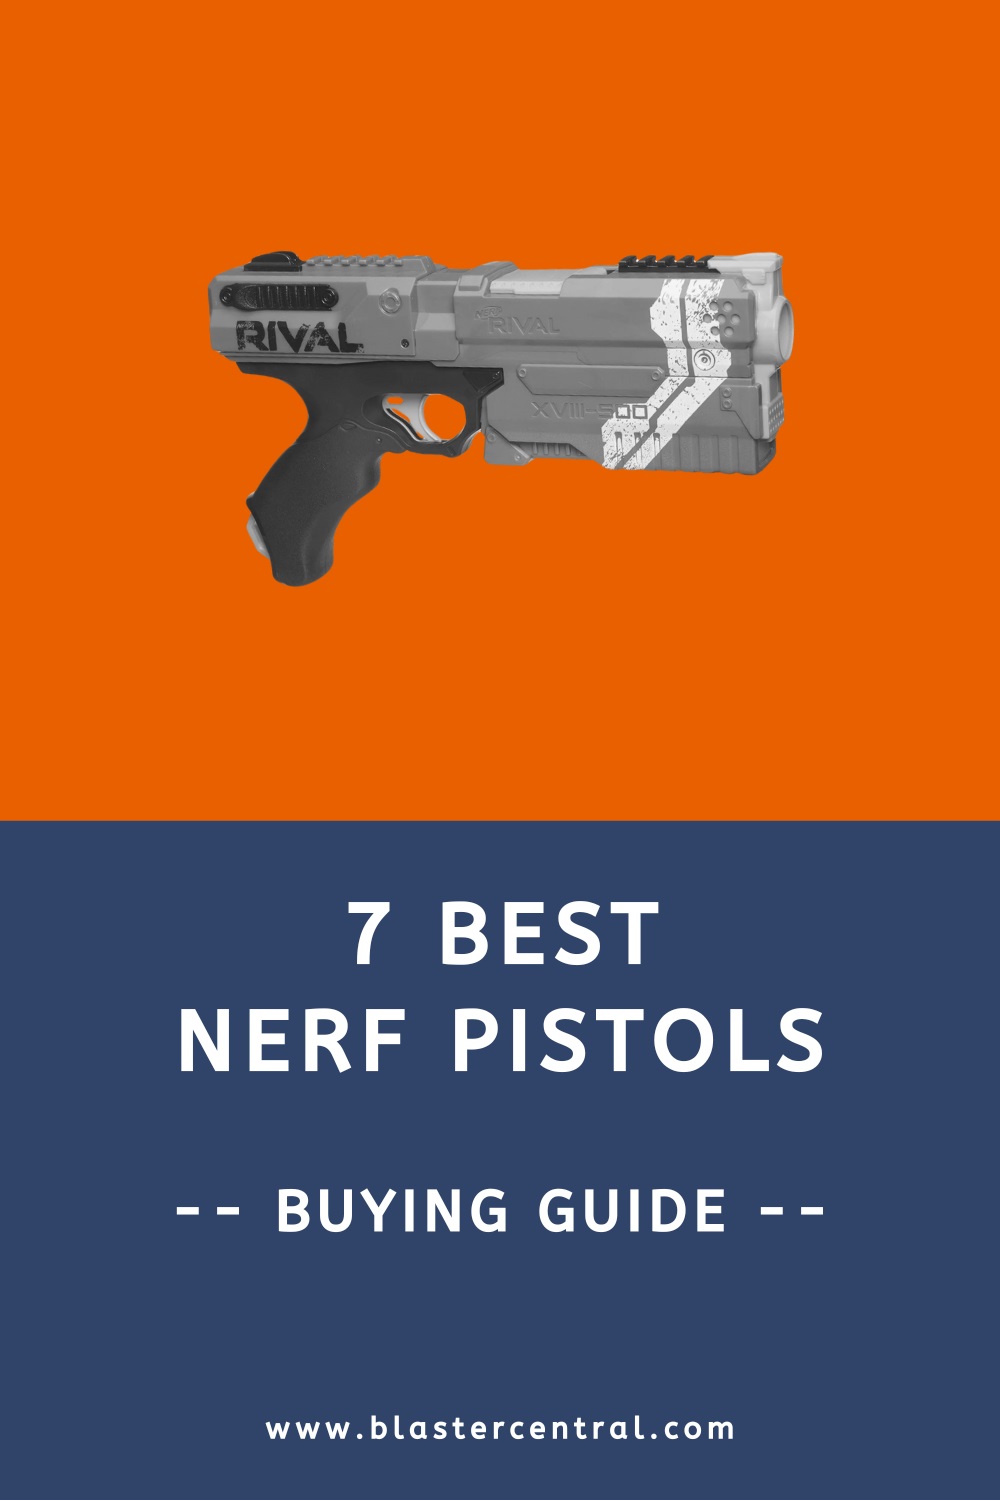 7 Best Nerf pistols (buying guide)